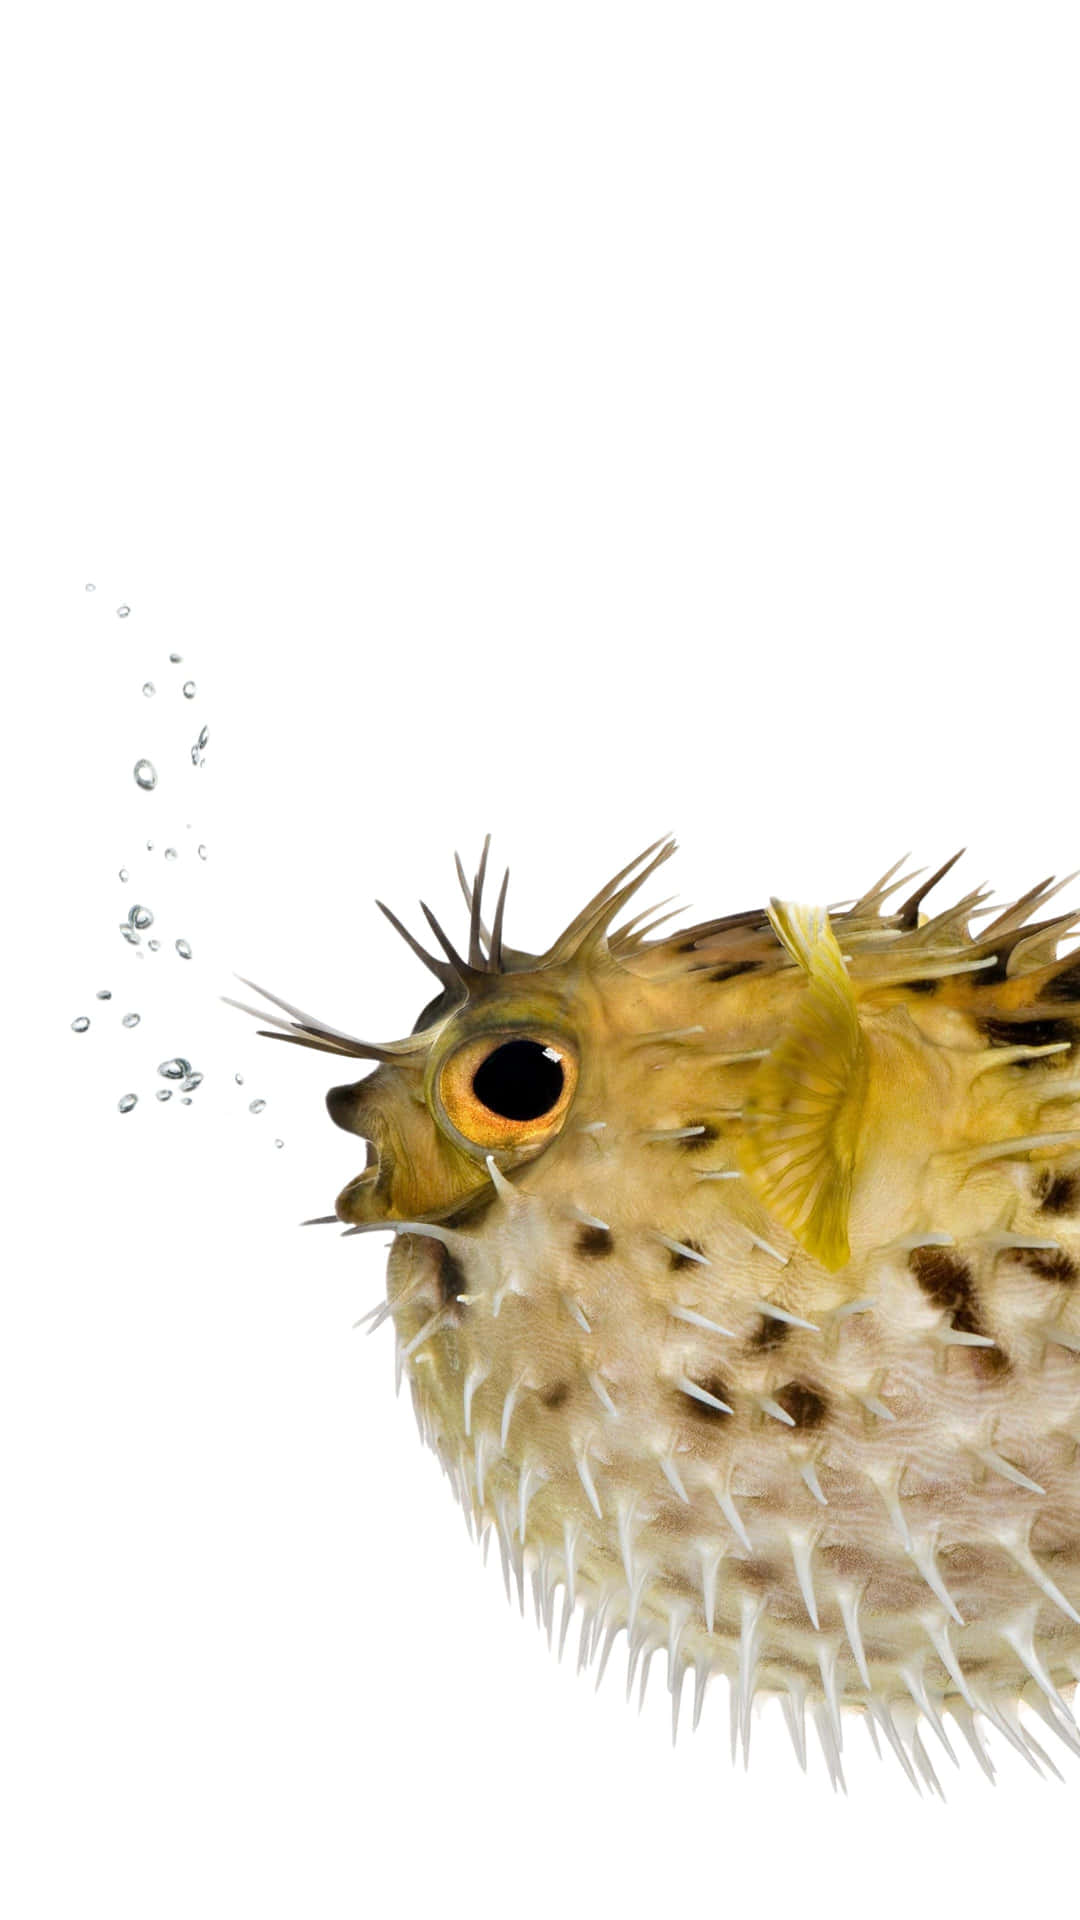 Inflated Blowfish White Background Wallpaper